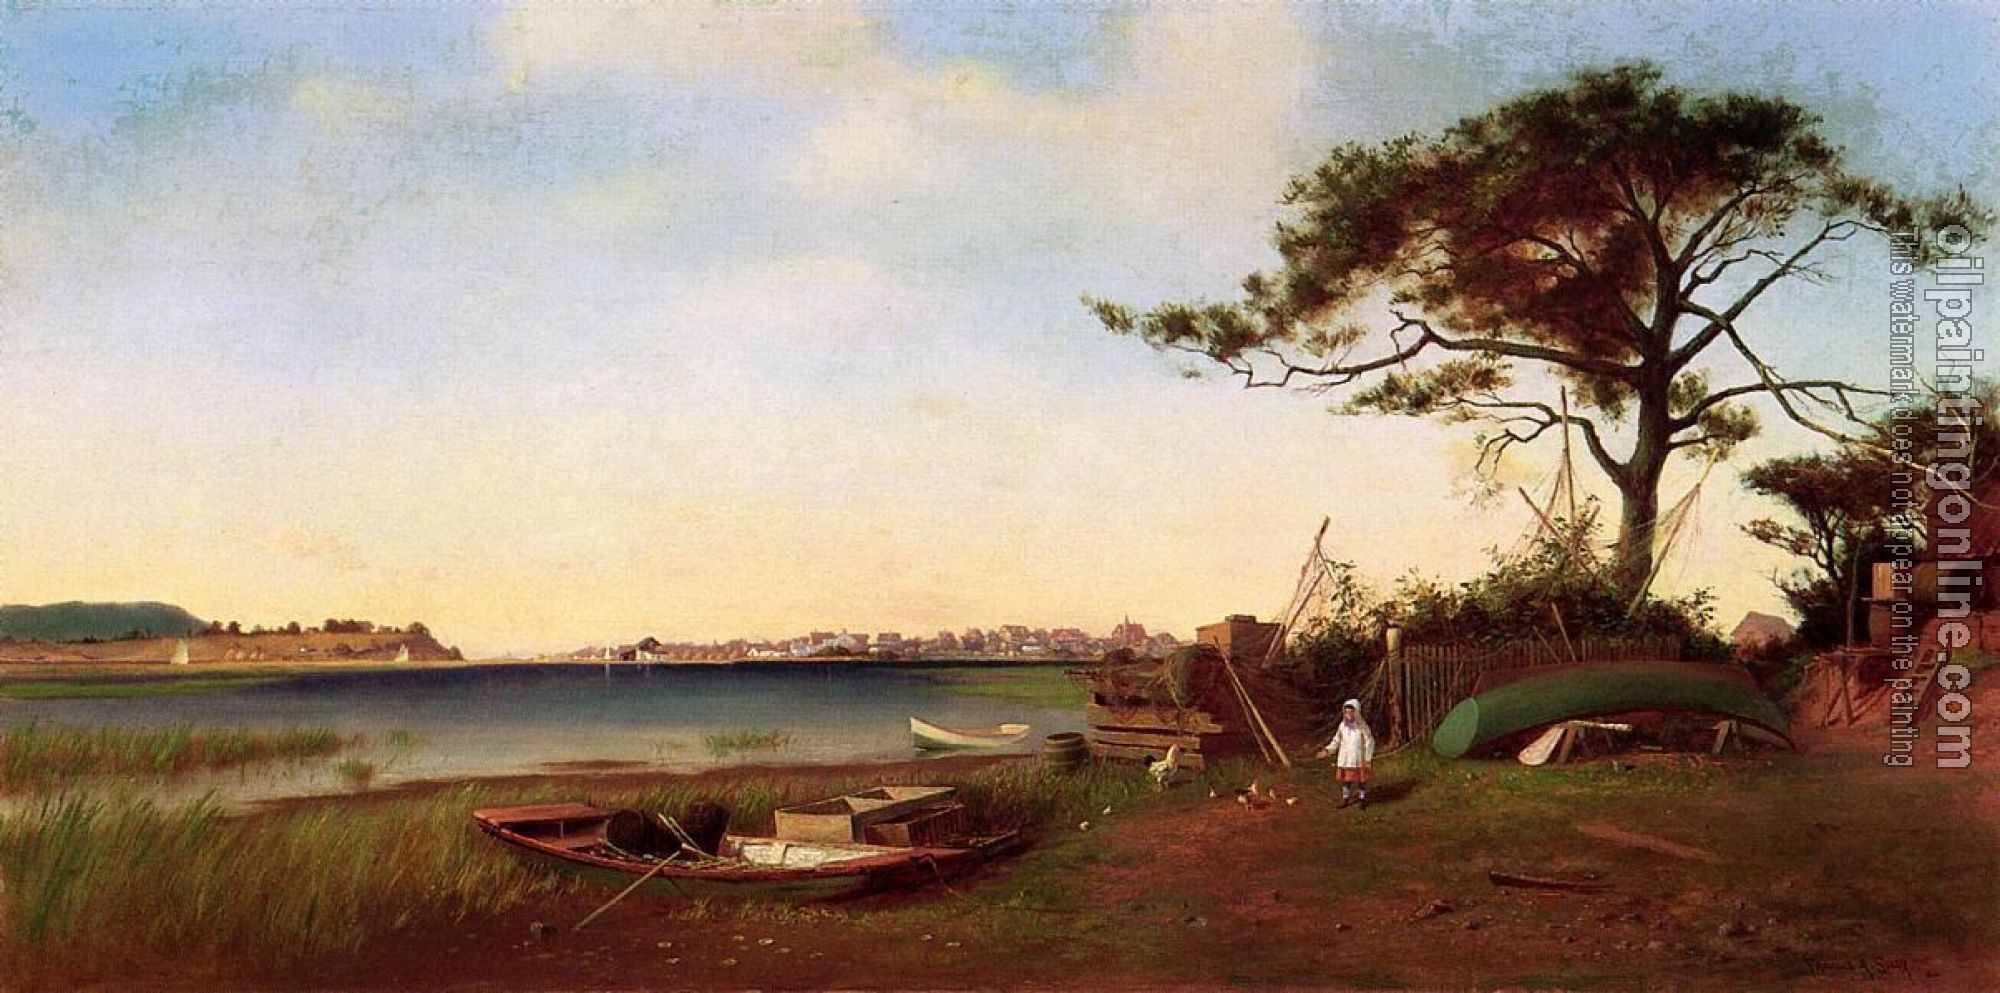 Silva, Francis A - Seabright from Galilee